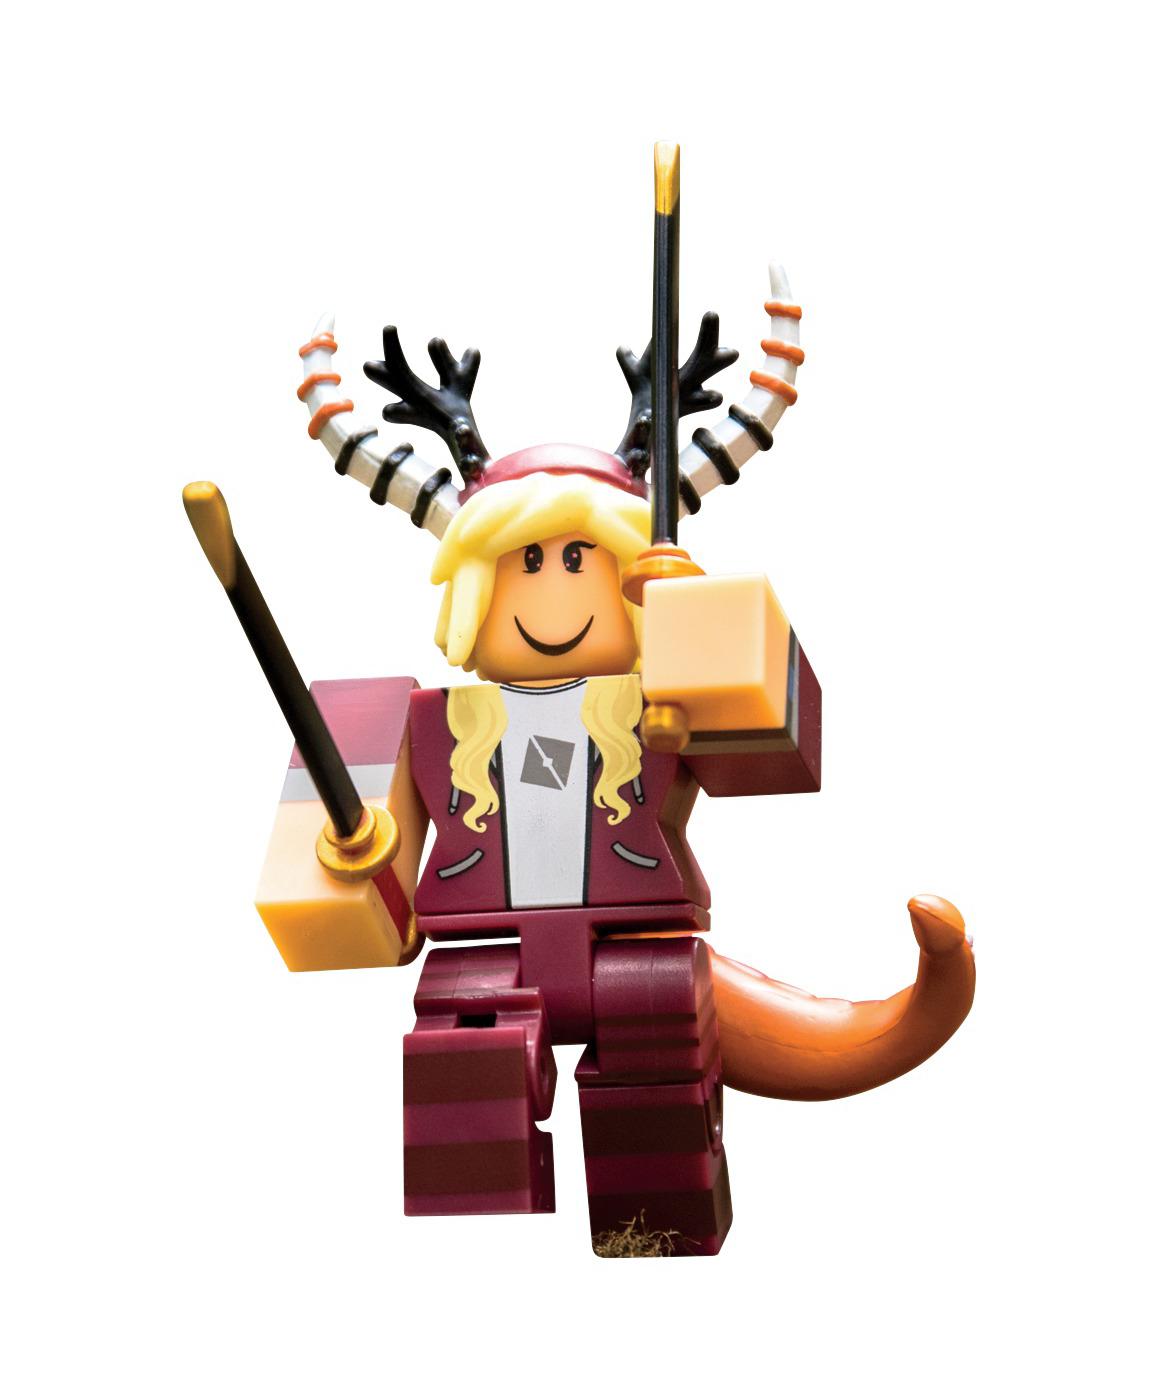 Roblox Core Figure Pack, Assorted - Shop Action Figures & Dolls at H-E-B